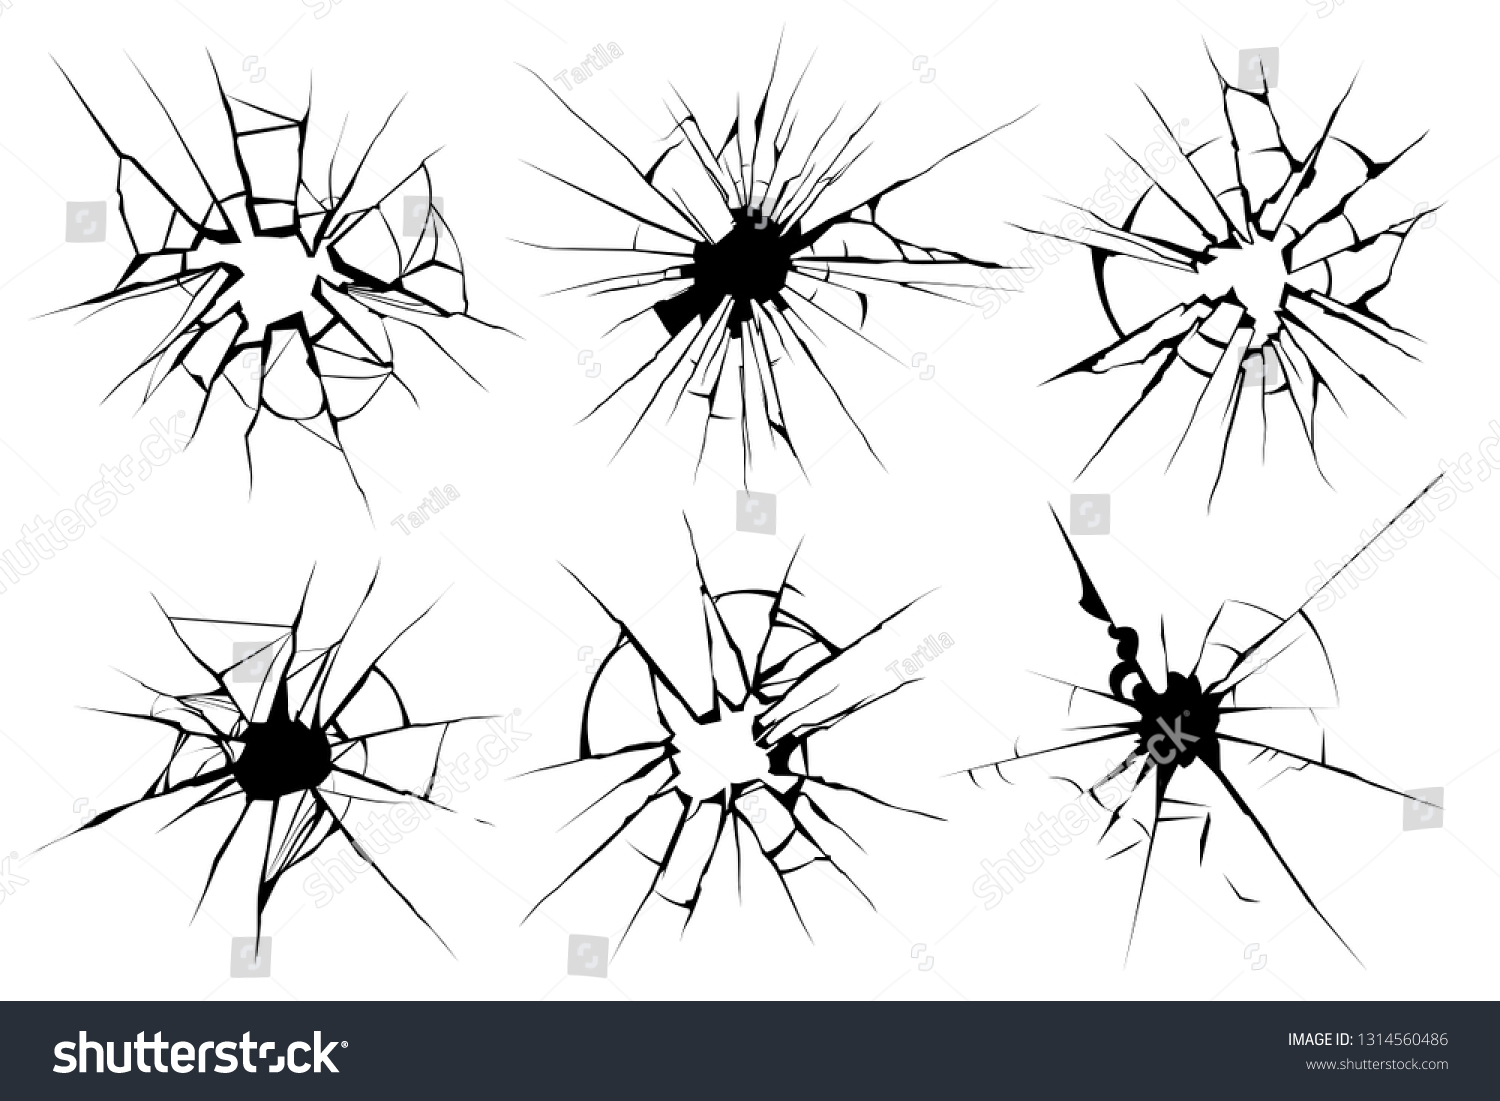 SVG of Cracked glass. Broken window, shattered glassy surface and break windshield glass texture silhouette. Crack shattered mirror or bullet hole. Vector illustration isolated icons set svg